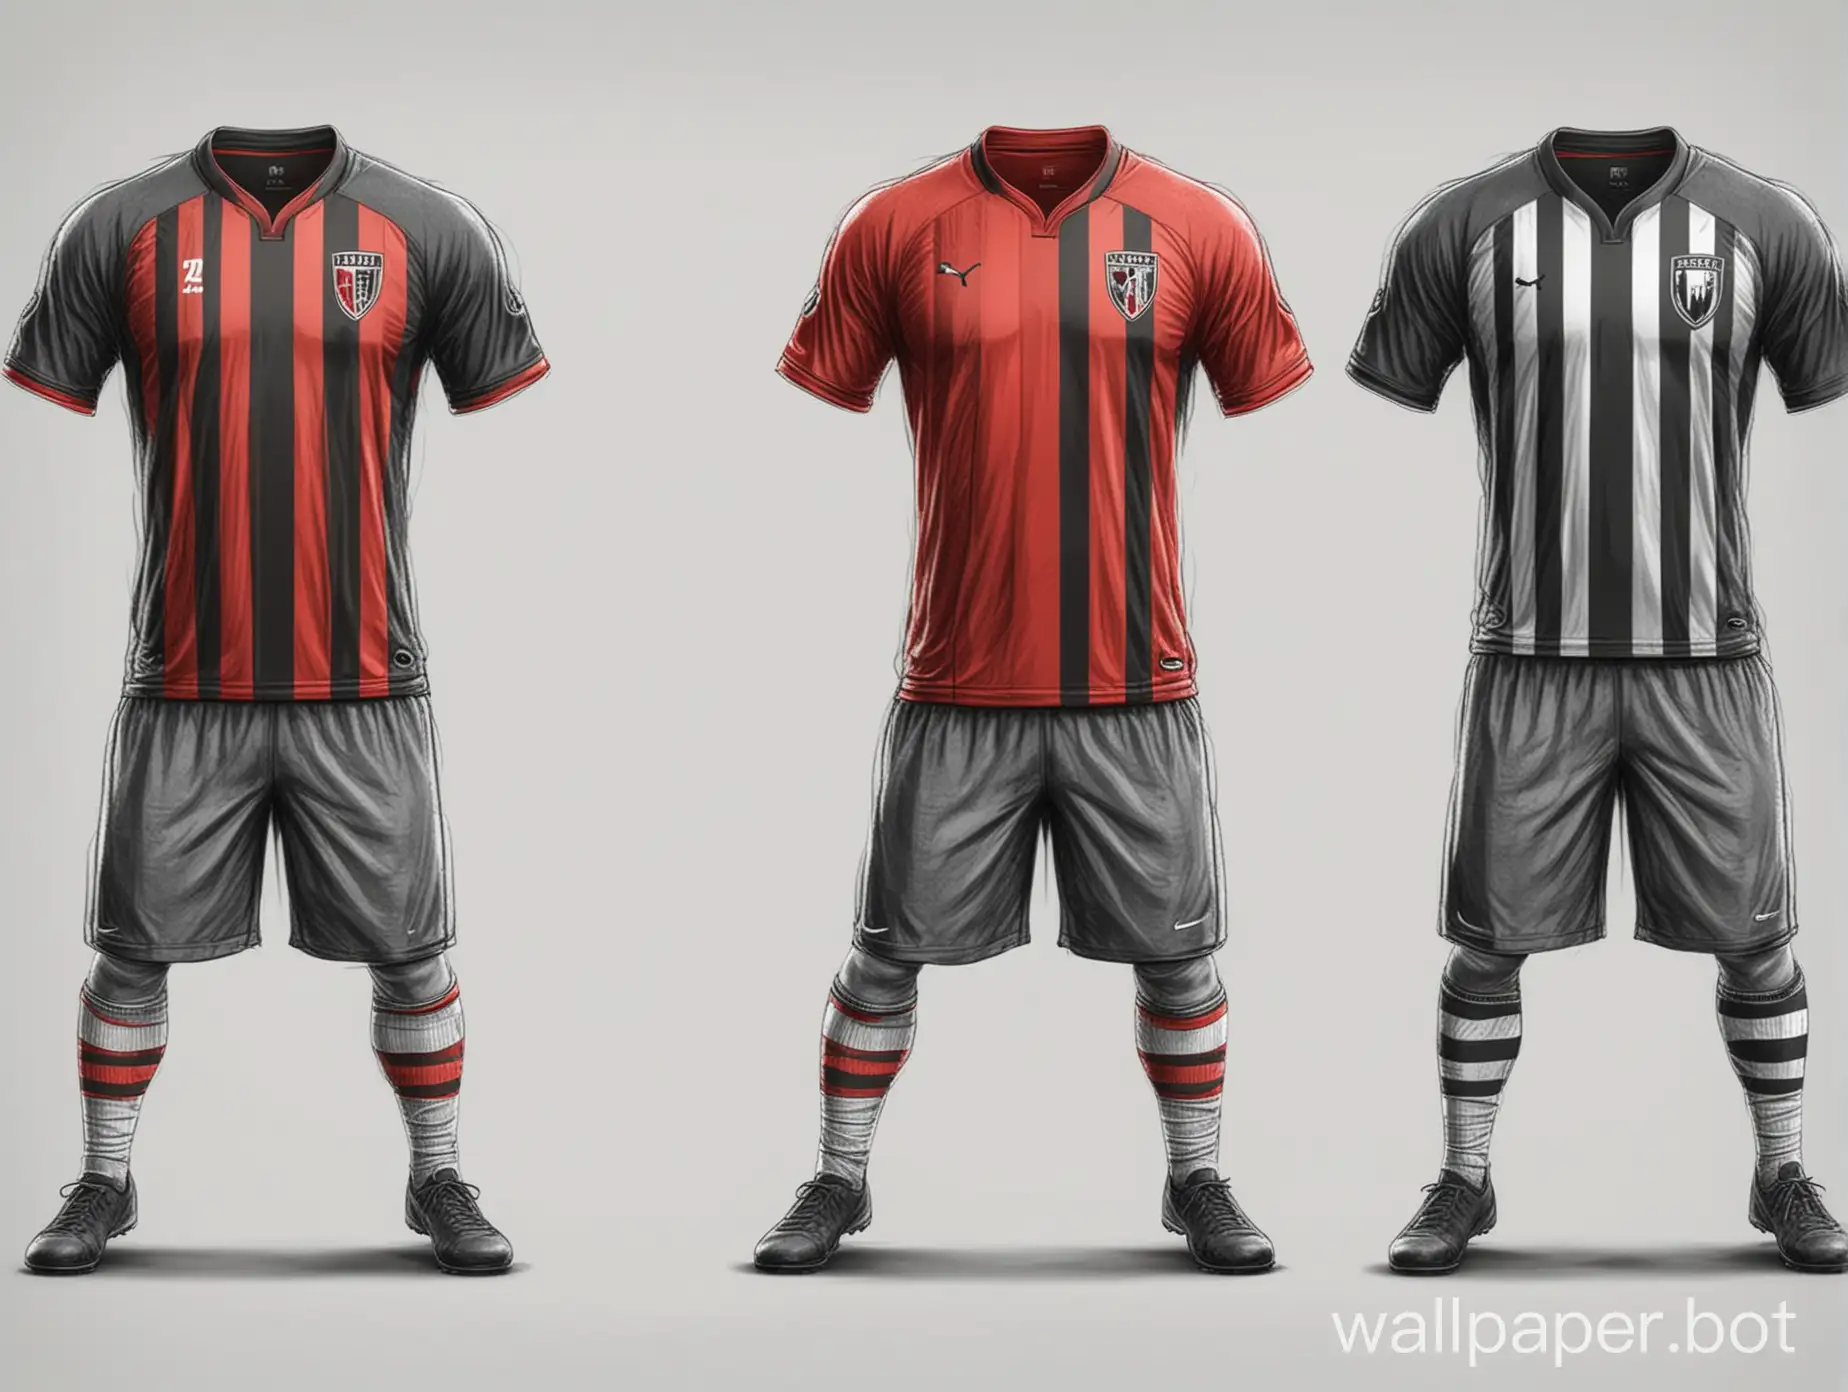 Soccer-Uniform-Sketch-Dynamic-Red-Black-and-Gray-Vertical-Stripes-on-White-Background